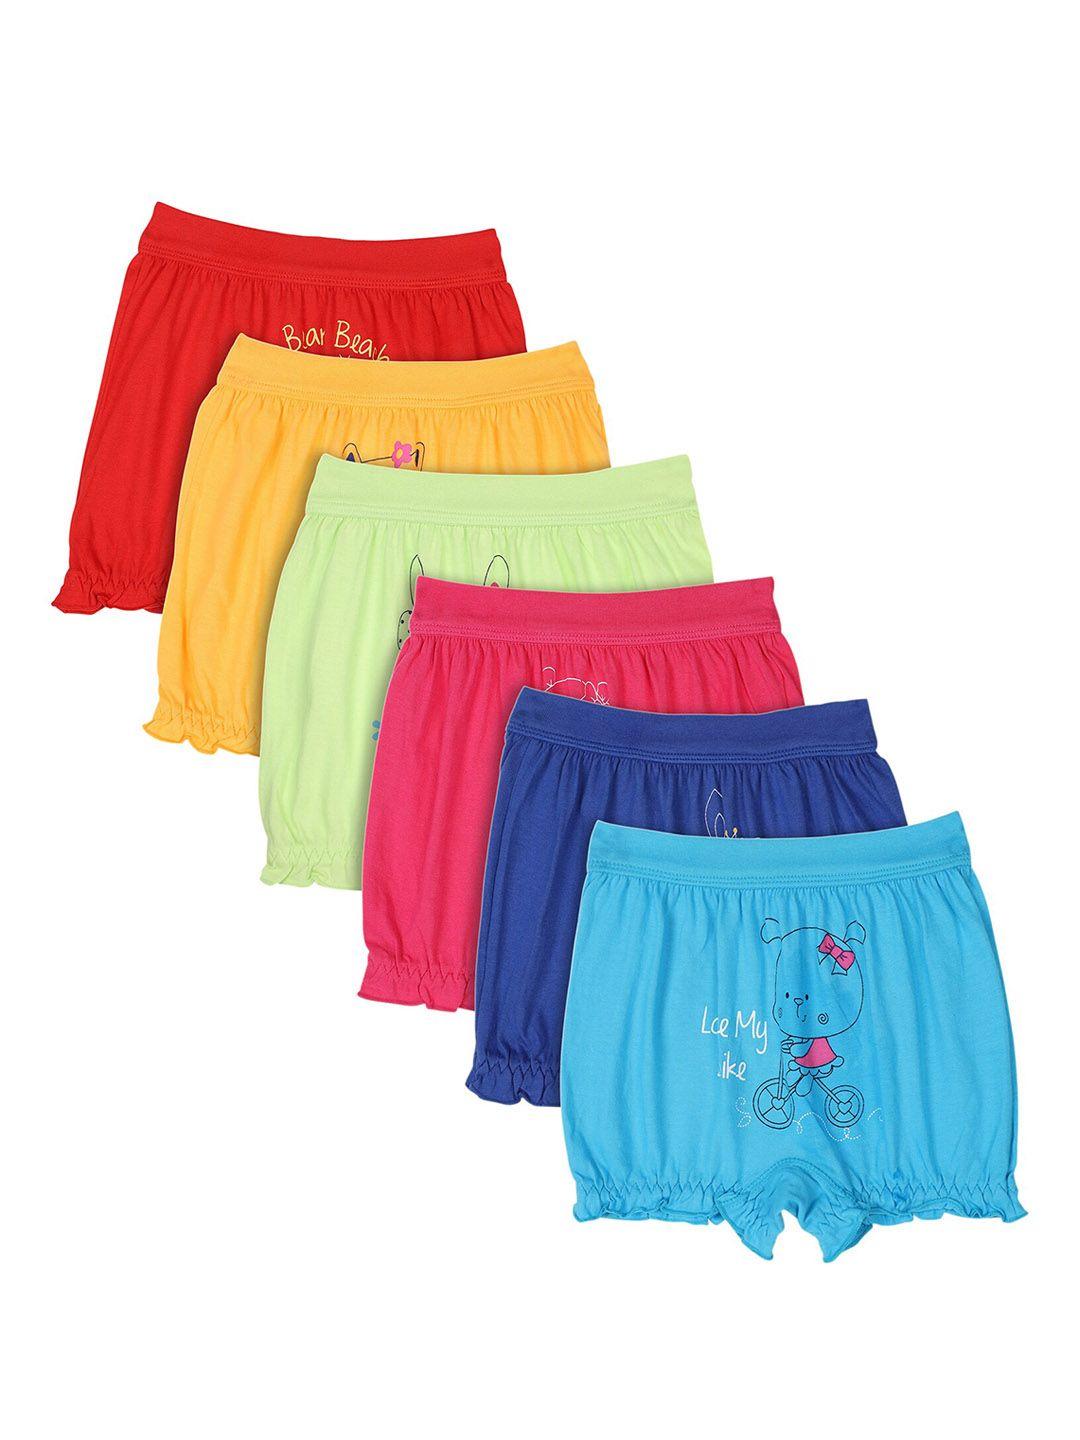 bodycare unisex kids pack of 6 assorted cotton basic bloomers